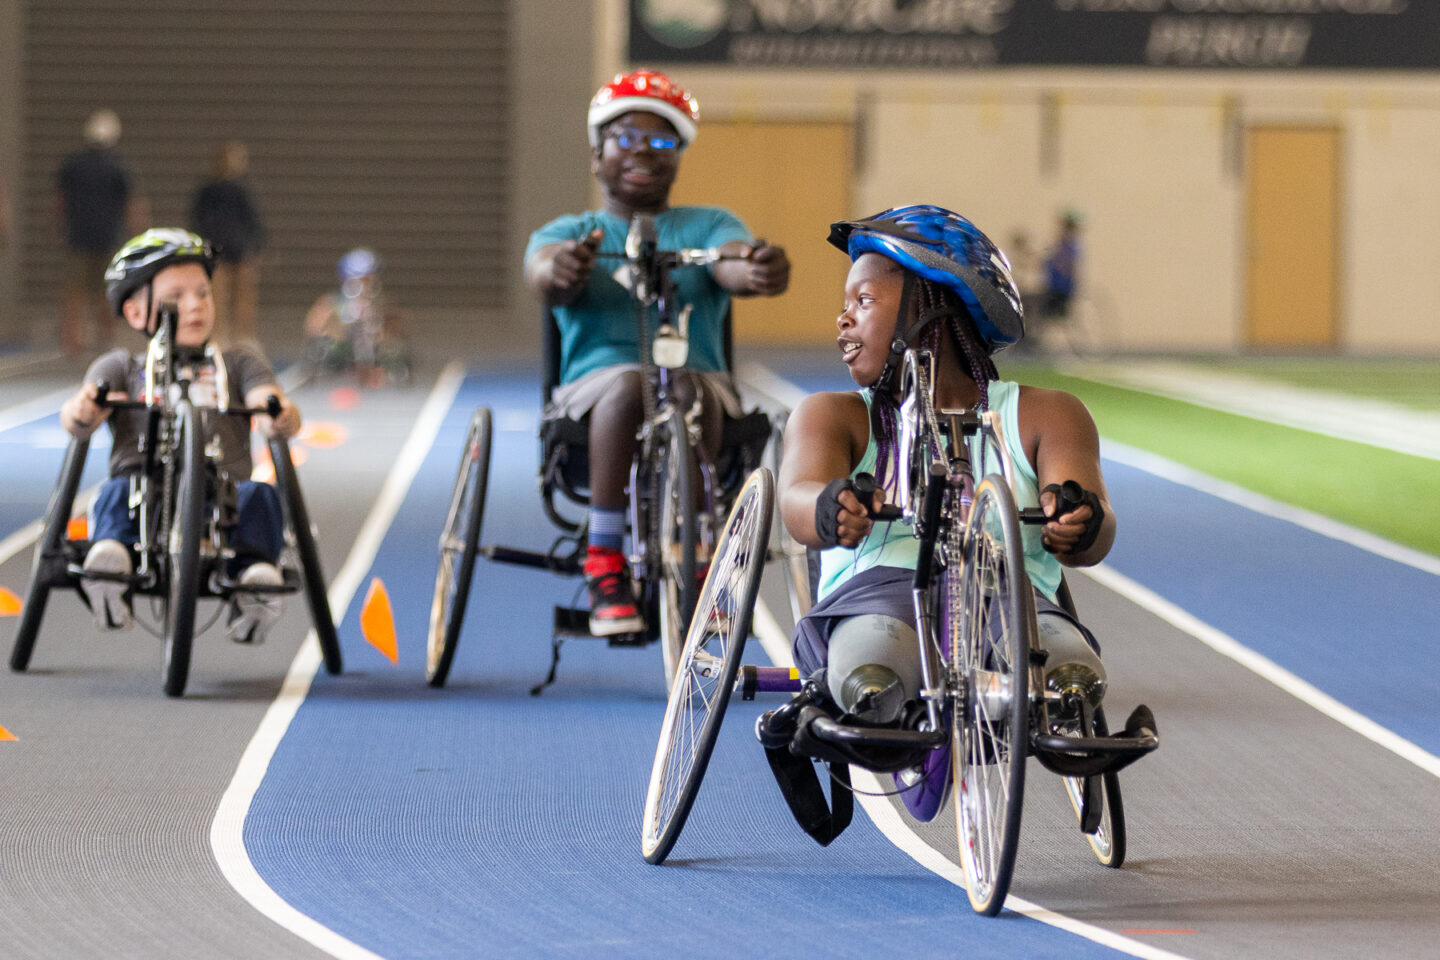 Participants riding handcycles on an indoor track.